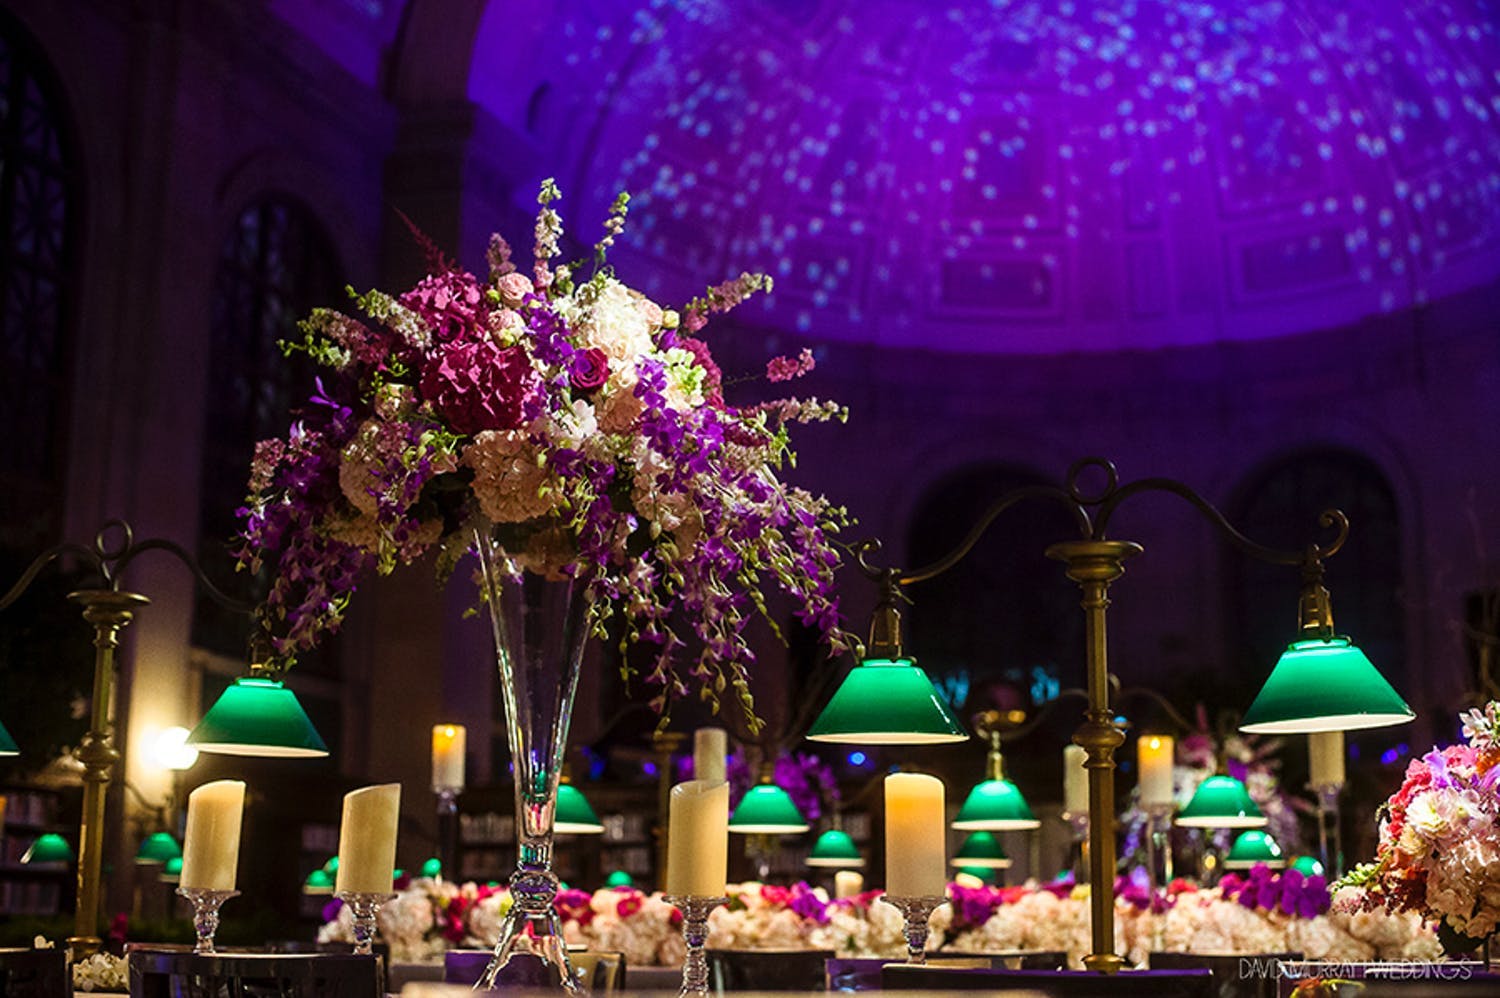 Boston Public Library Wedding With Purple Ceiling Lighting Décor, Green Lamp and Floral Centerpieces | PartySlate